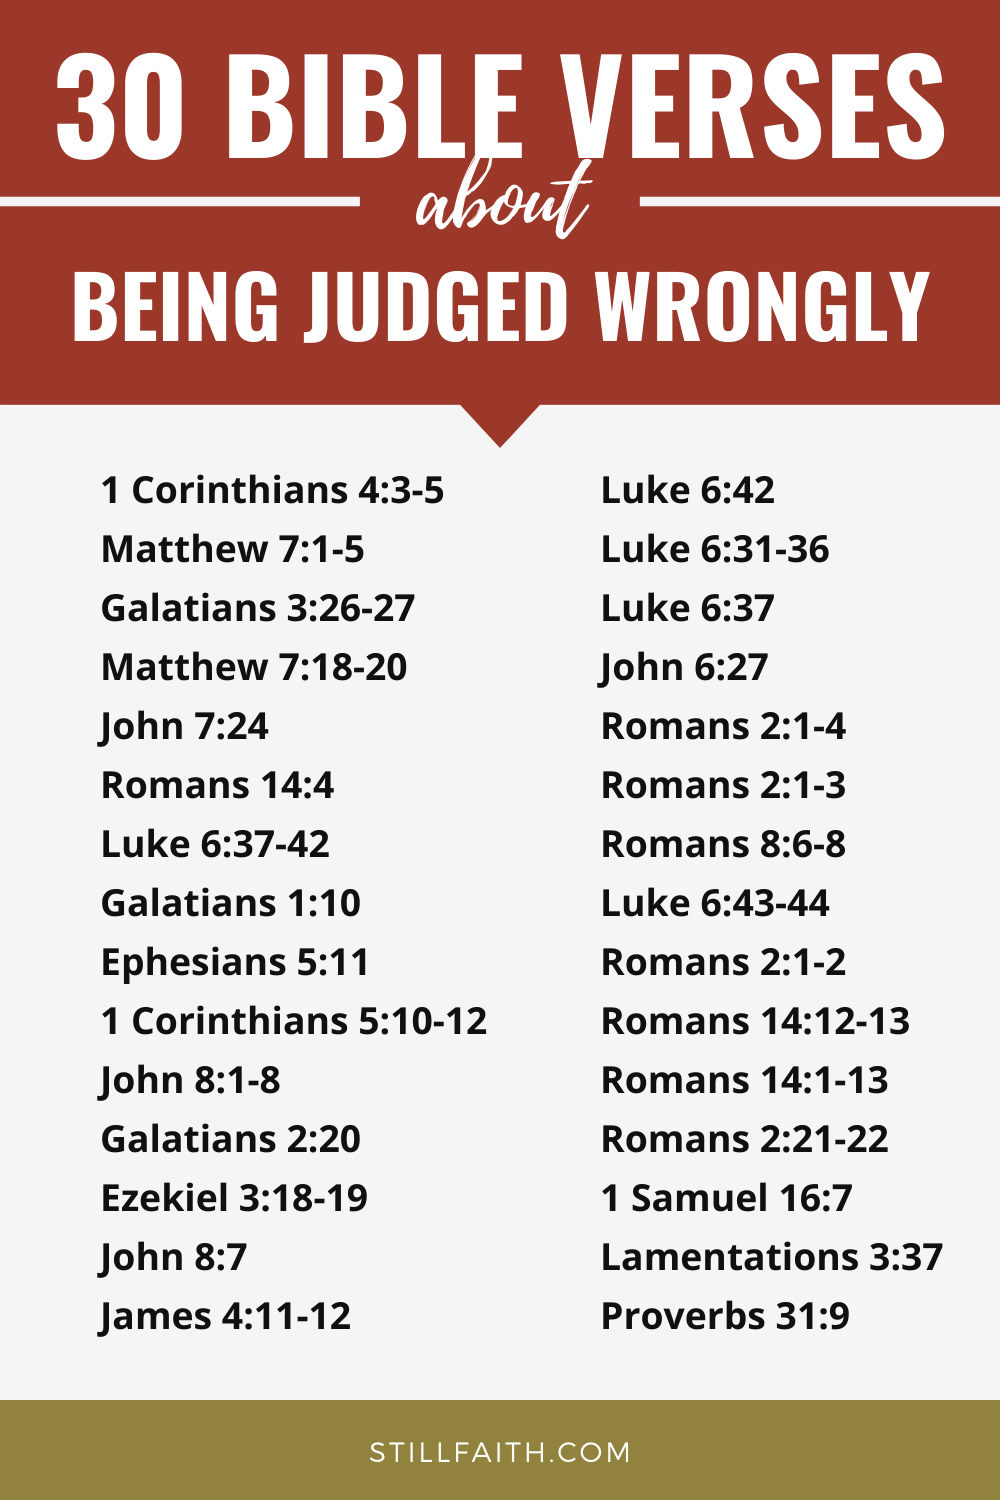 82 Bible Verses about Being Judged Wrongly